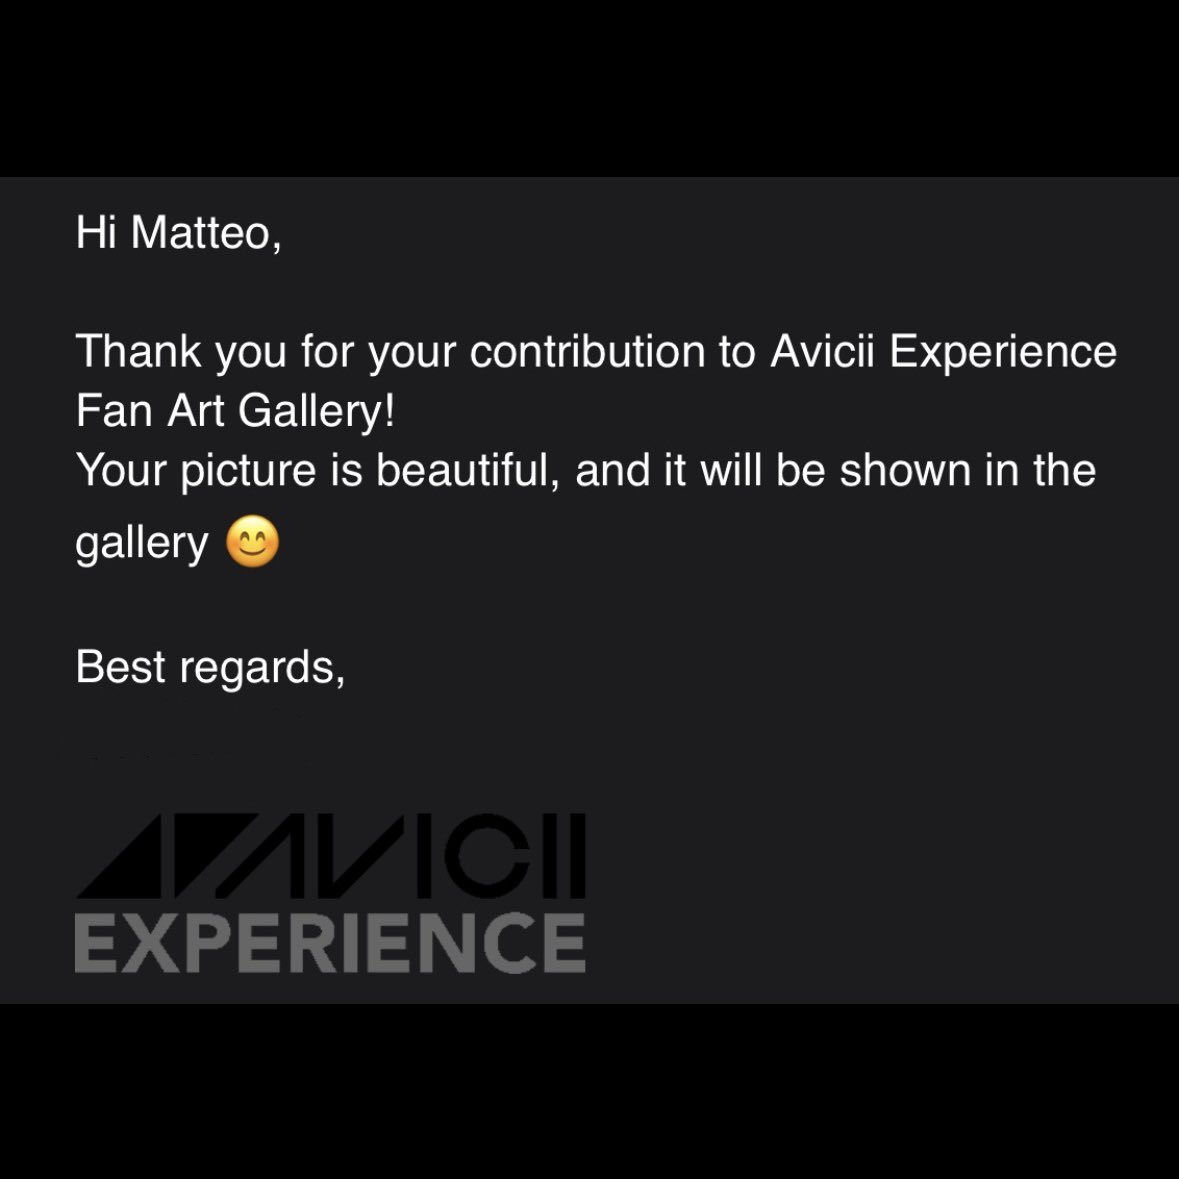 6 years ago you reached #Heaven.. I imagined you playing your music from there.. a foundation of my passion. #AVICII 💙◢ ◤ Super happy my image created with AI text-prompt via #WonderApp is currently shown at #AviciiExperience gallery in Stockholm 🥹 Can’t wait to see it!